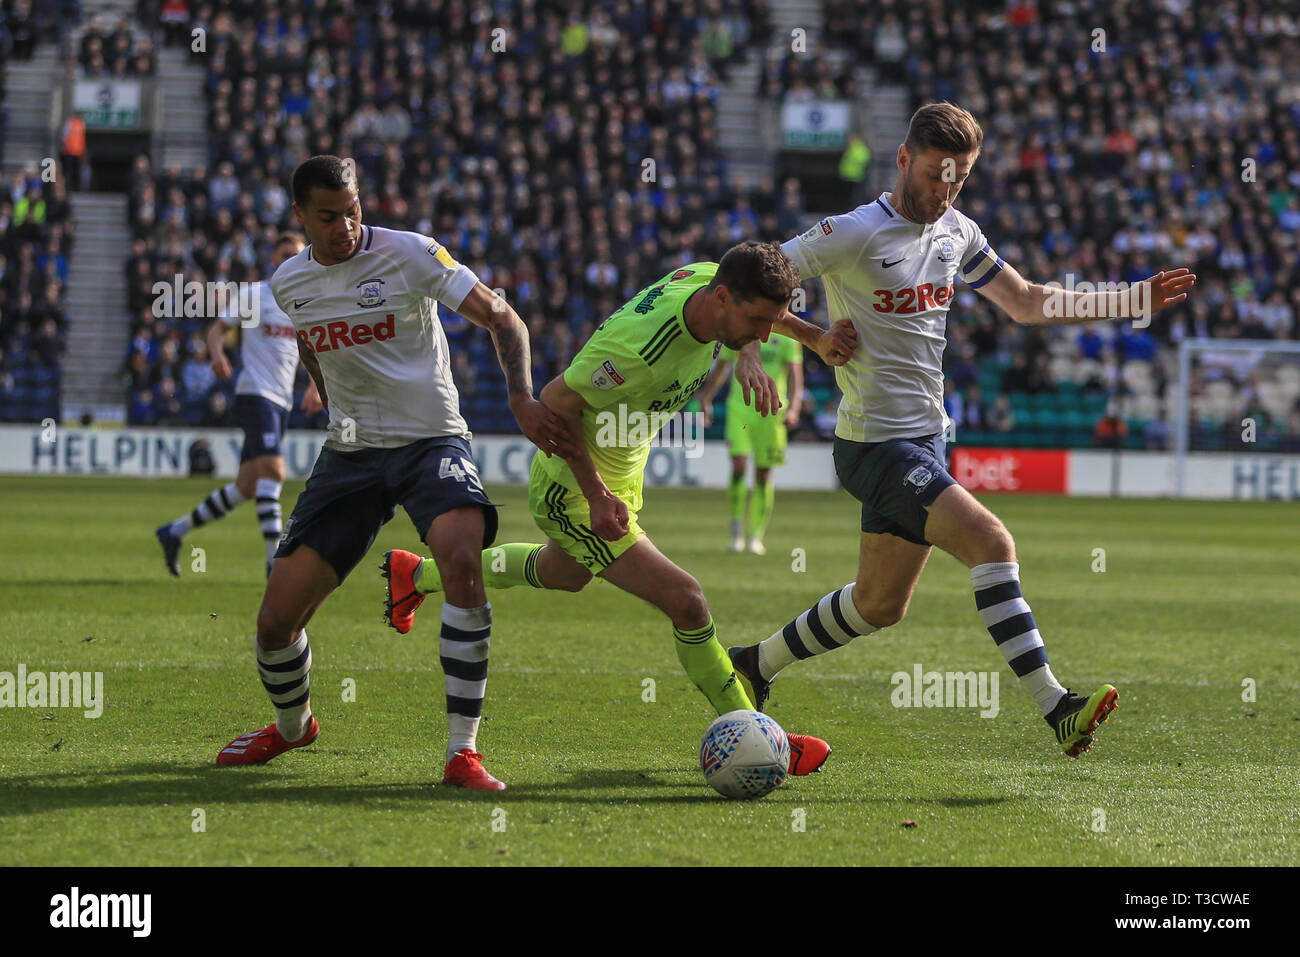 6th April 2019 , Deepdale, Preston, England; Sky Bet Championship, Preston North End vs Sheffield United ;  Chris Basham (06) of Sheffield United appeals for a penalty but referee Gavin Ward says no   Credit: Mark Cosgrove/News Images  English Football League images are subject to DataCo Licence Stock Photo